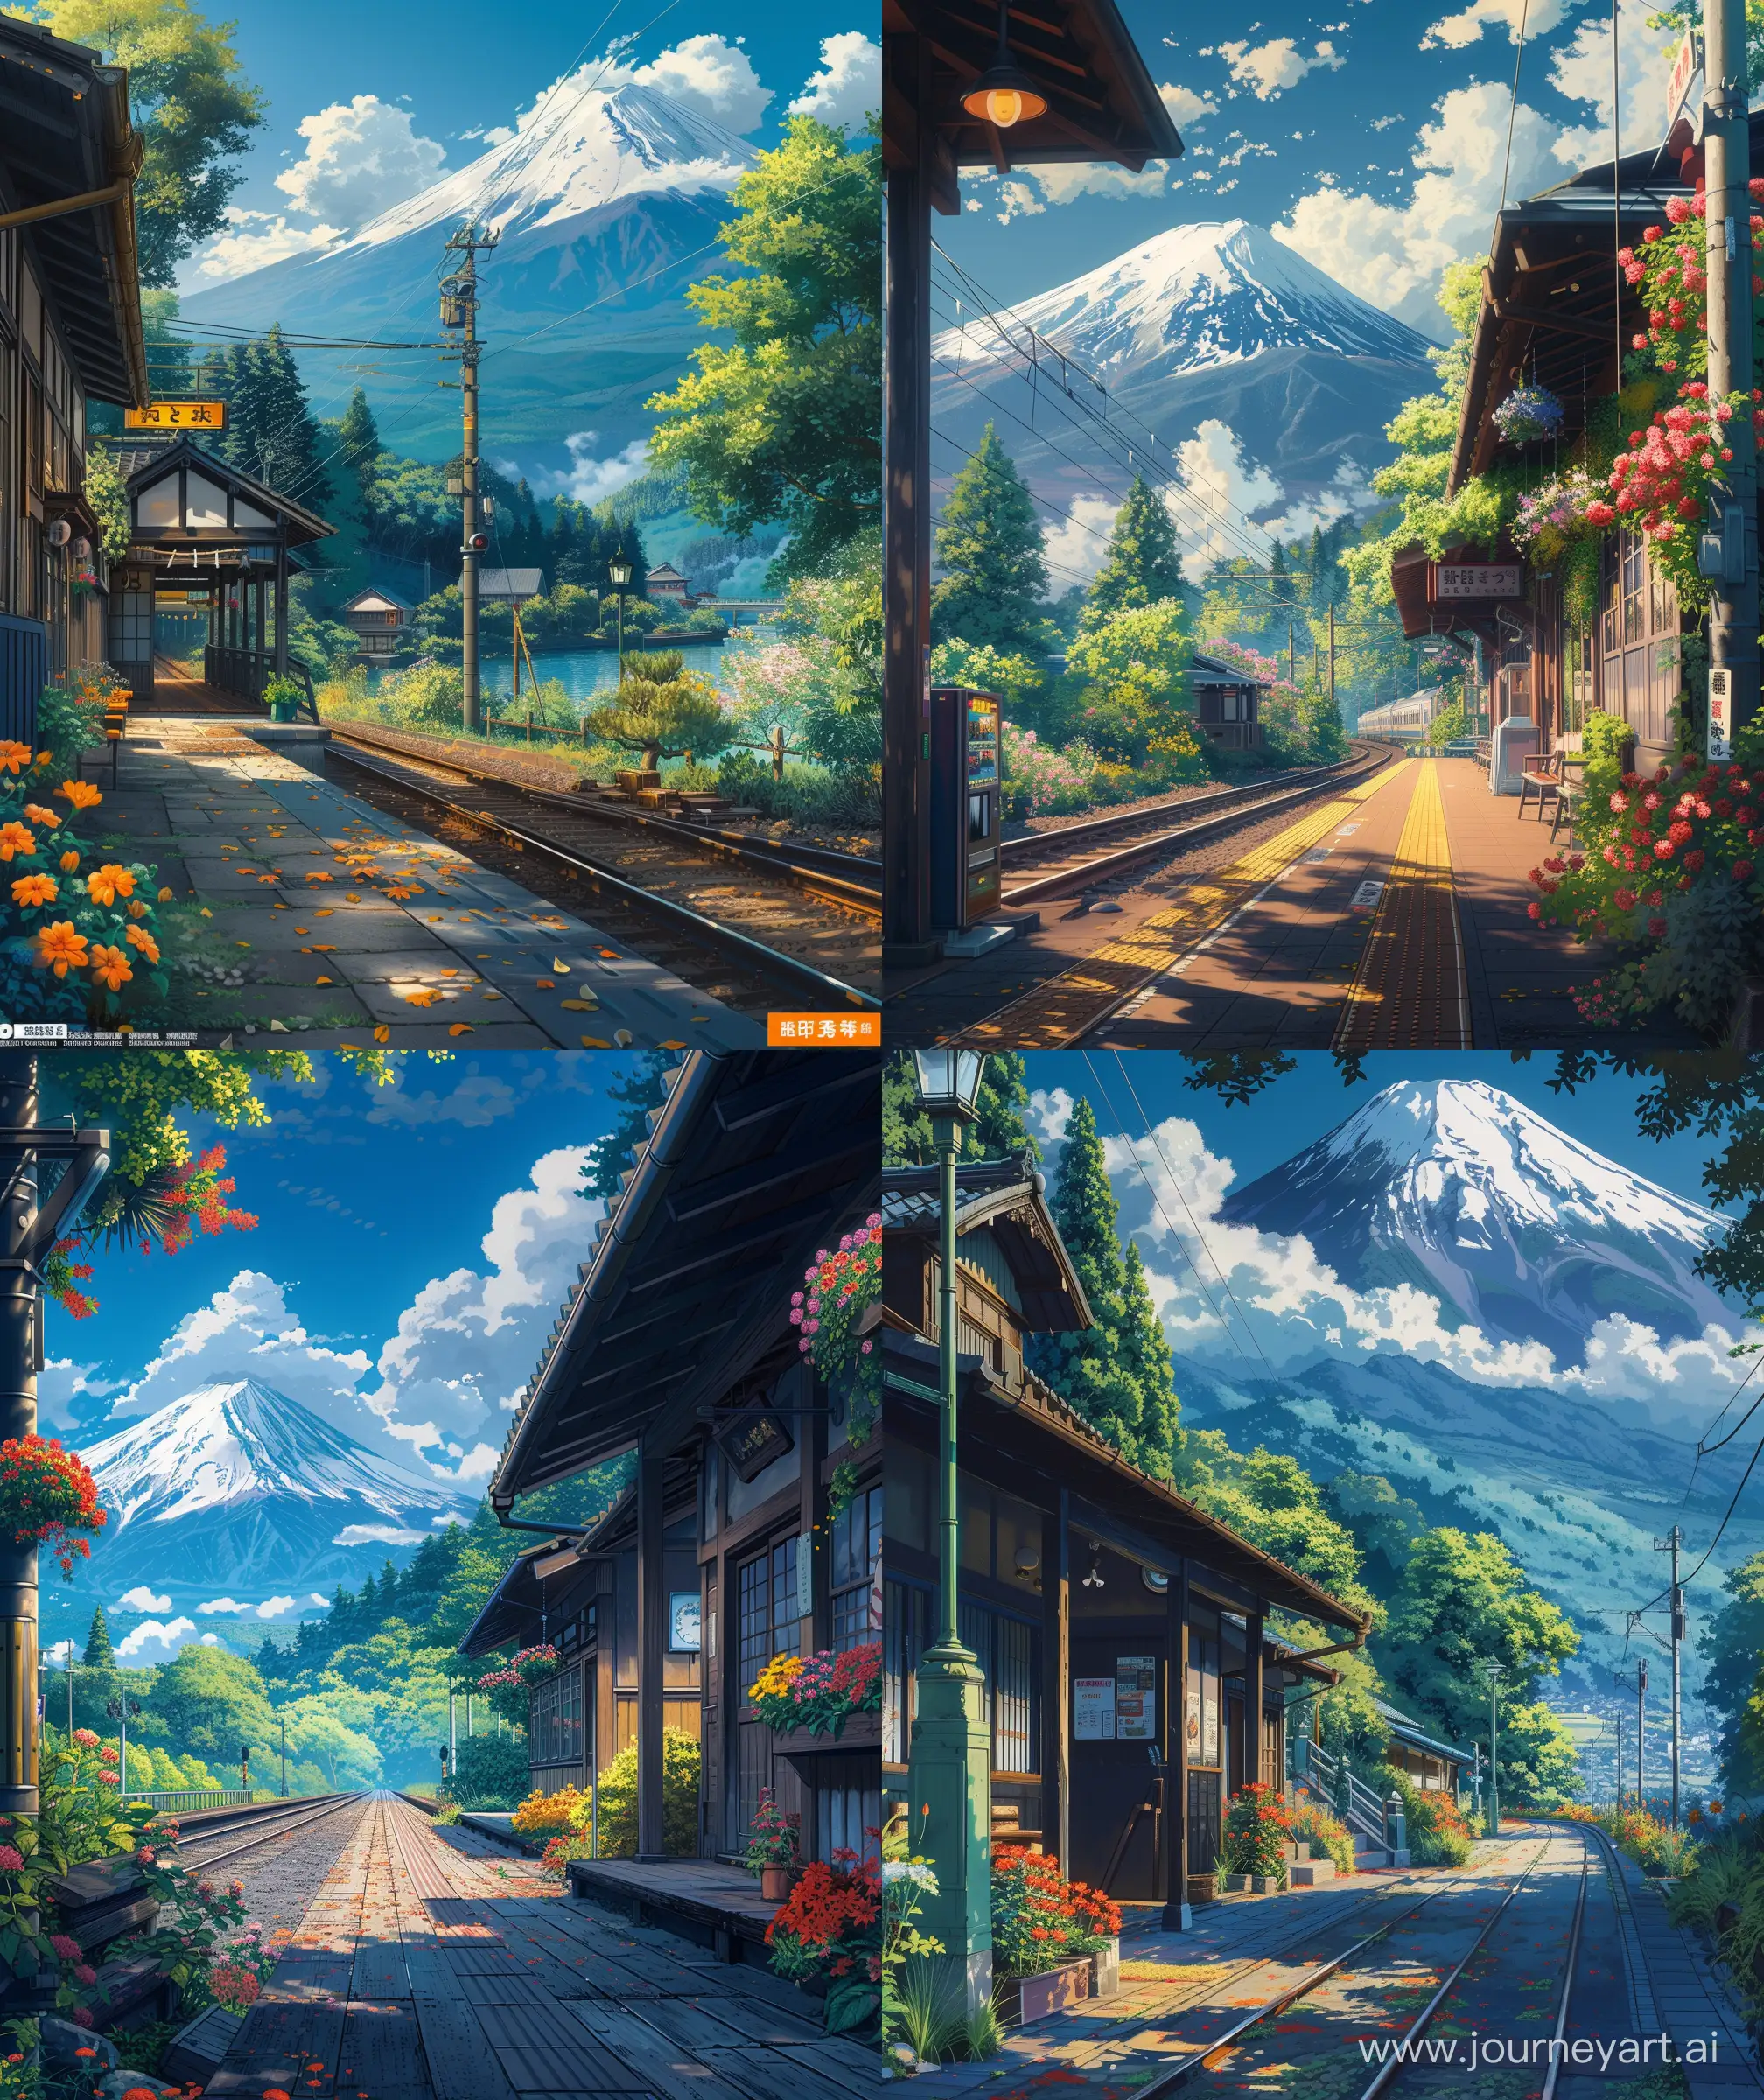 Serene-GhibliStyle-Anime-Scene-Japanese-Train-Station-with-Mount-Fuji-View-and-Summer-Blooms